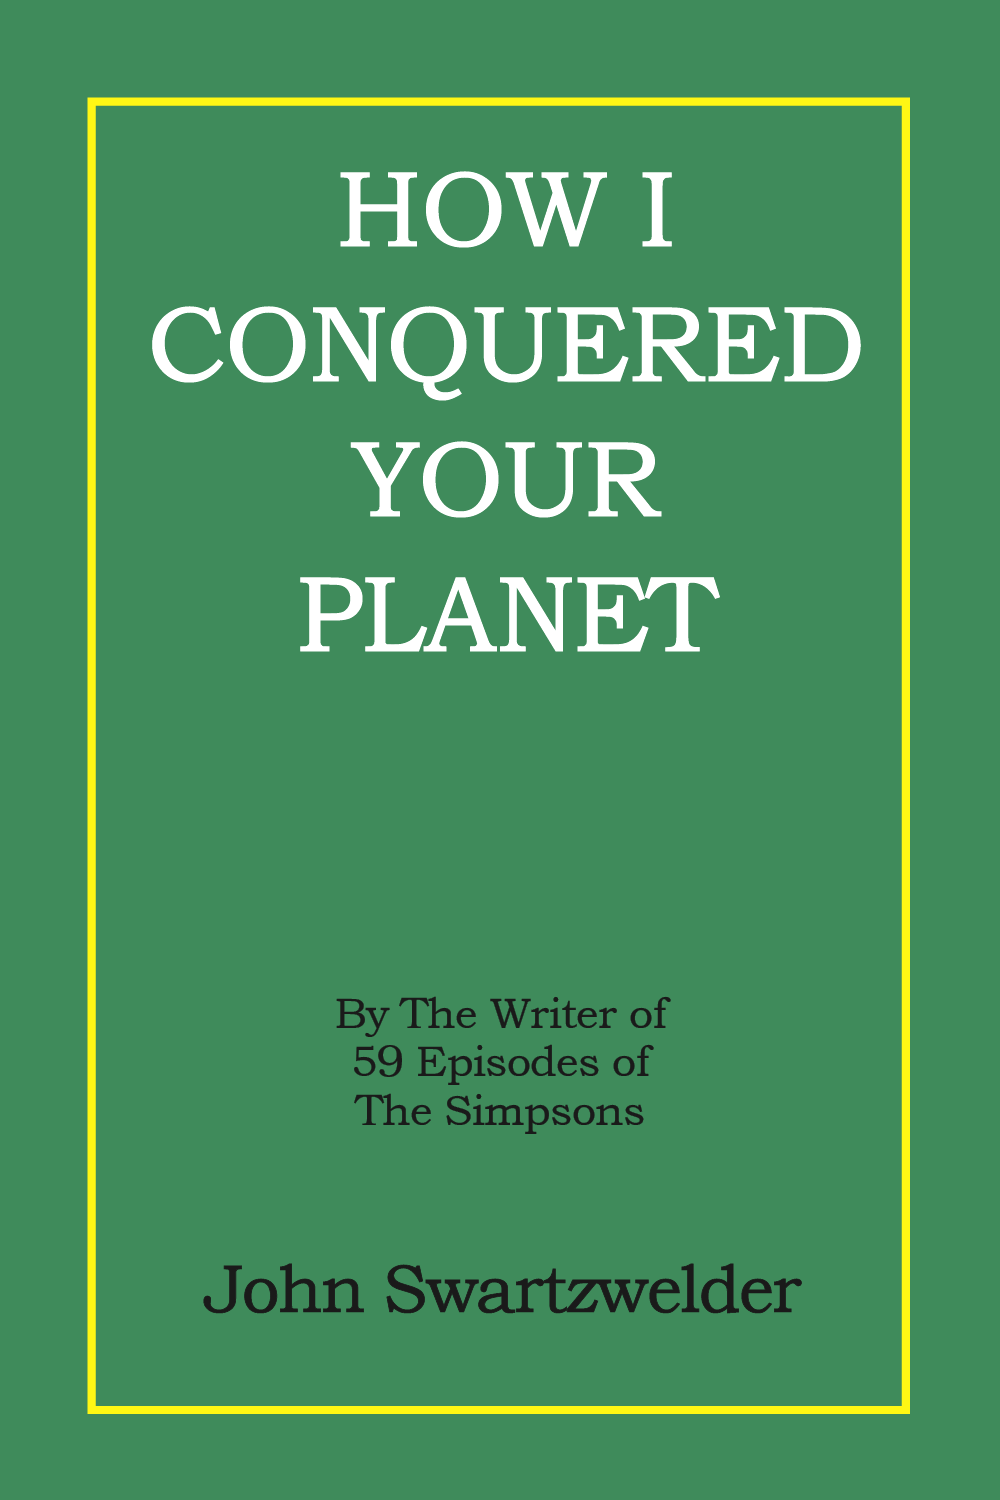 How I Conquered Your Planet by John Swartzwelder